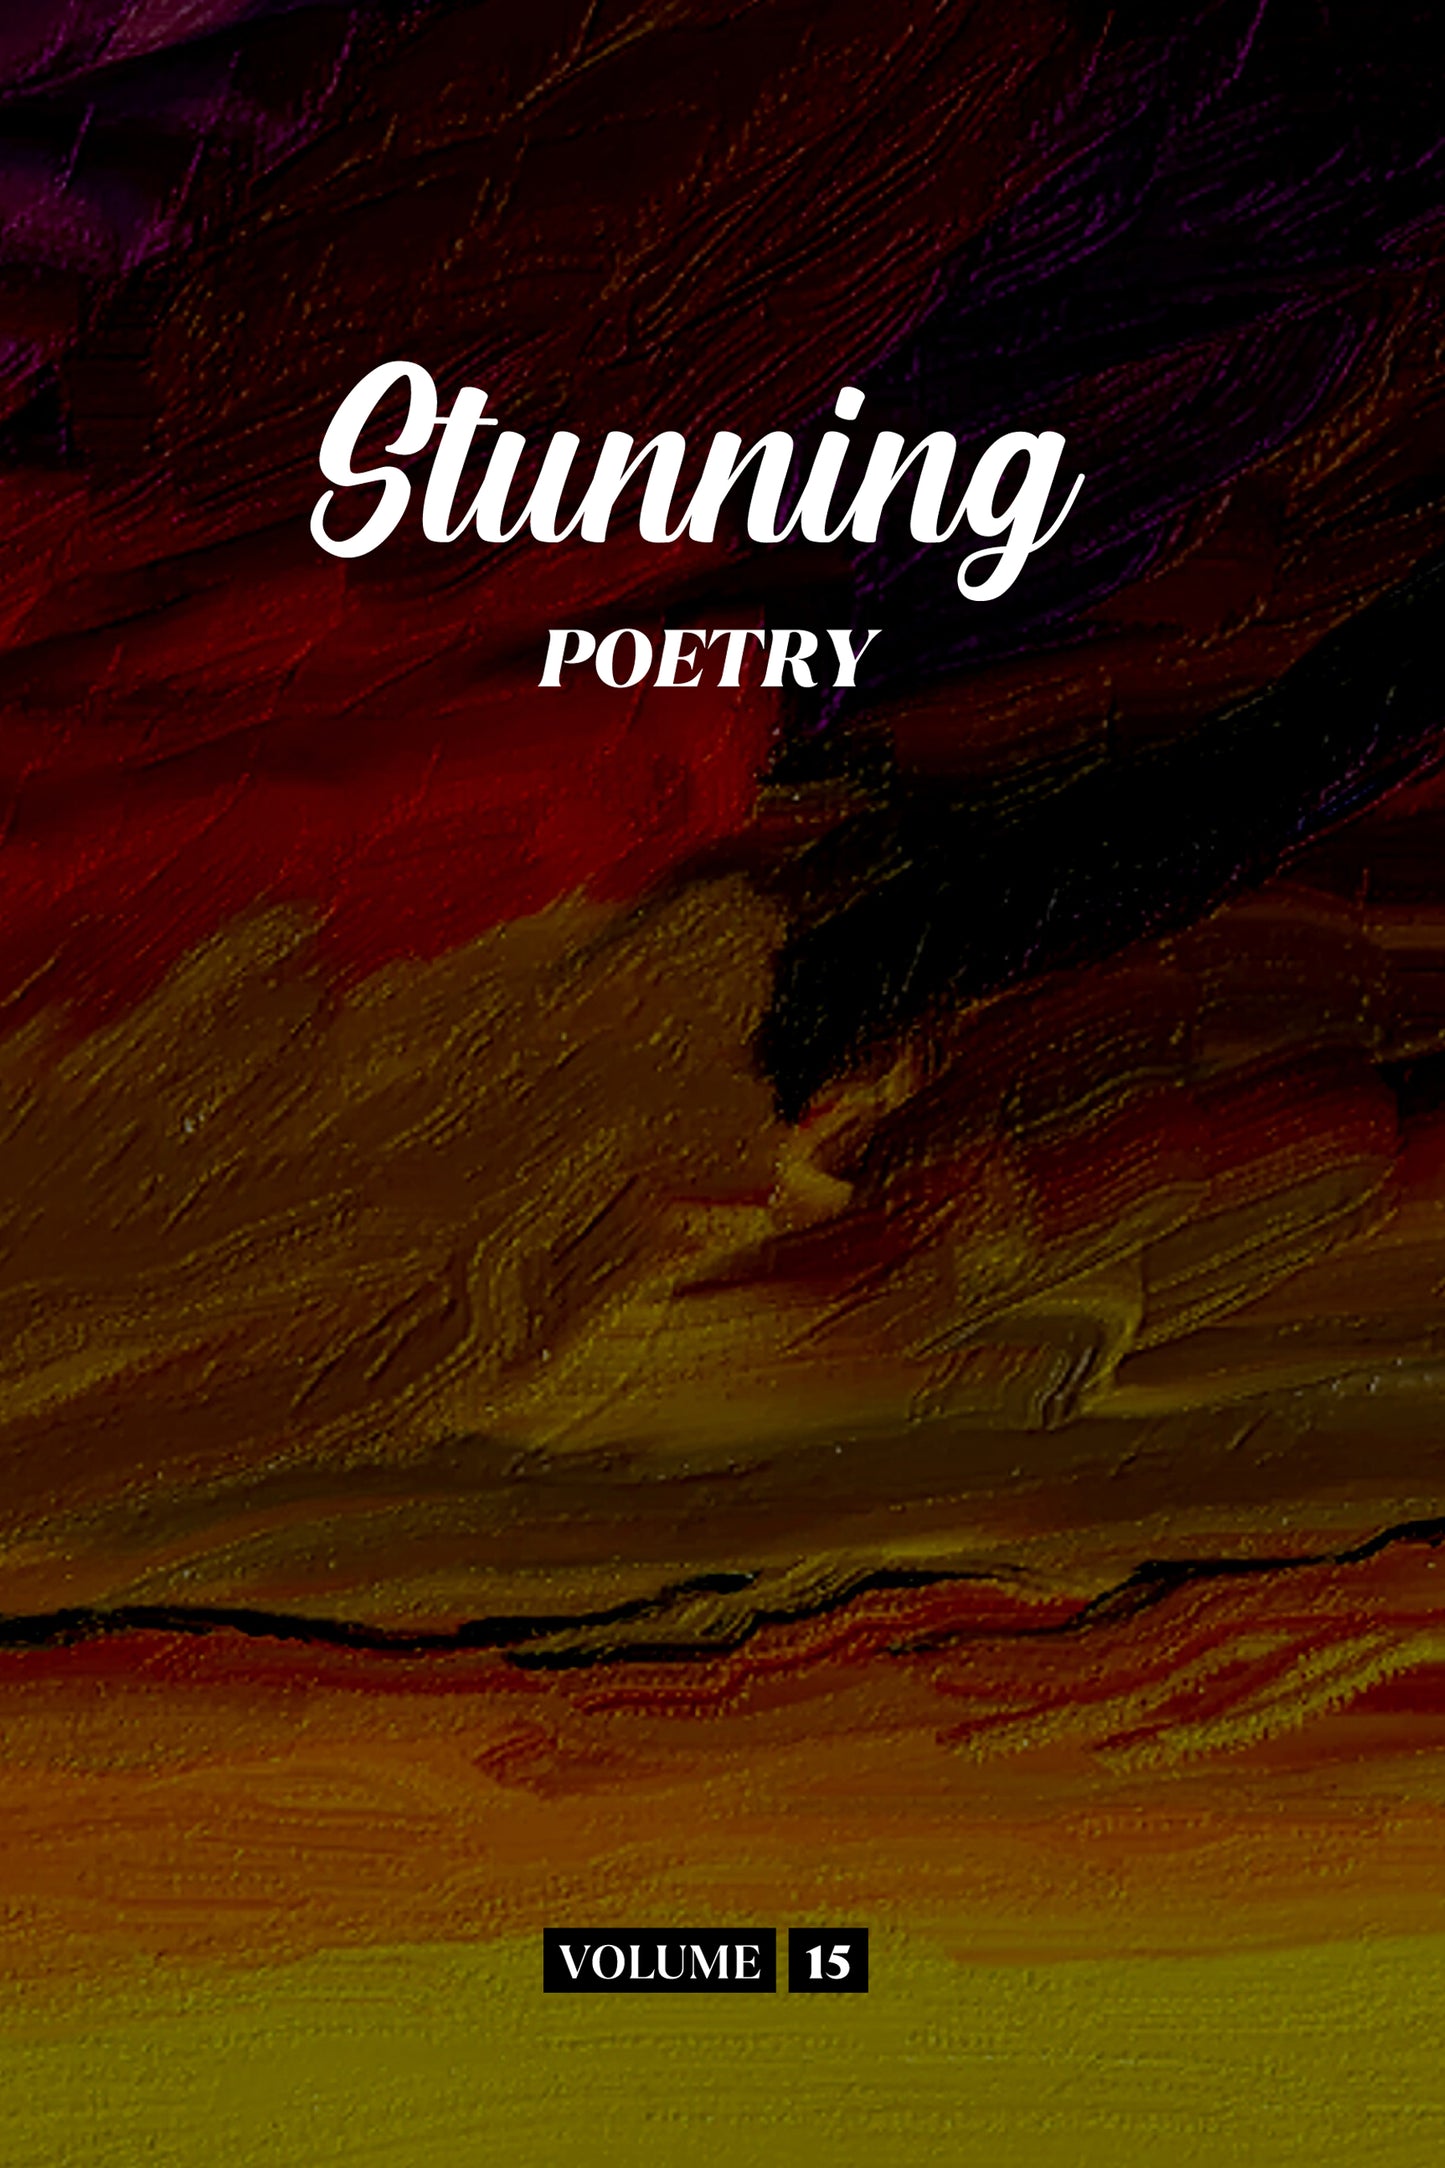 Stunning Poetry (Volume 15) - Physical Book